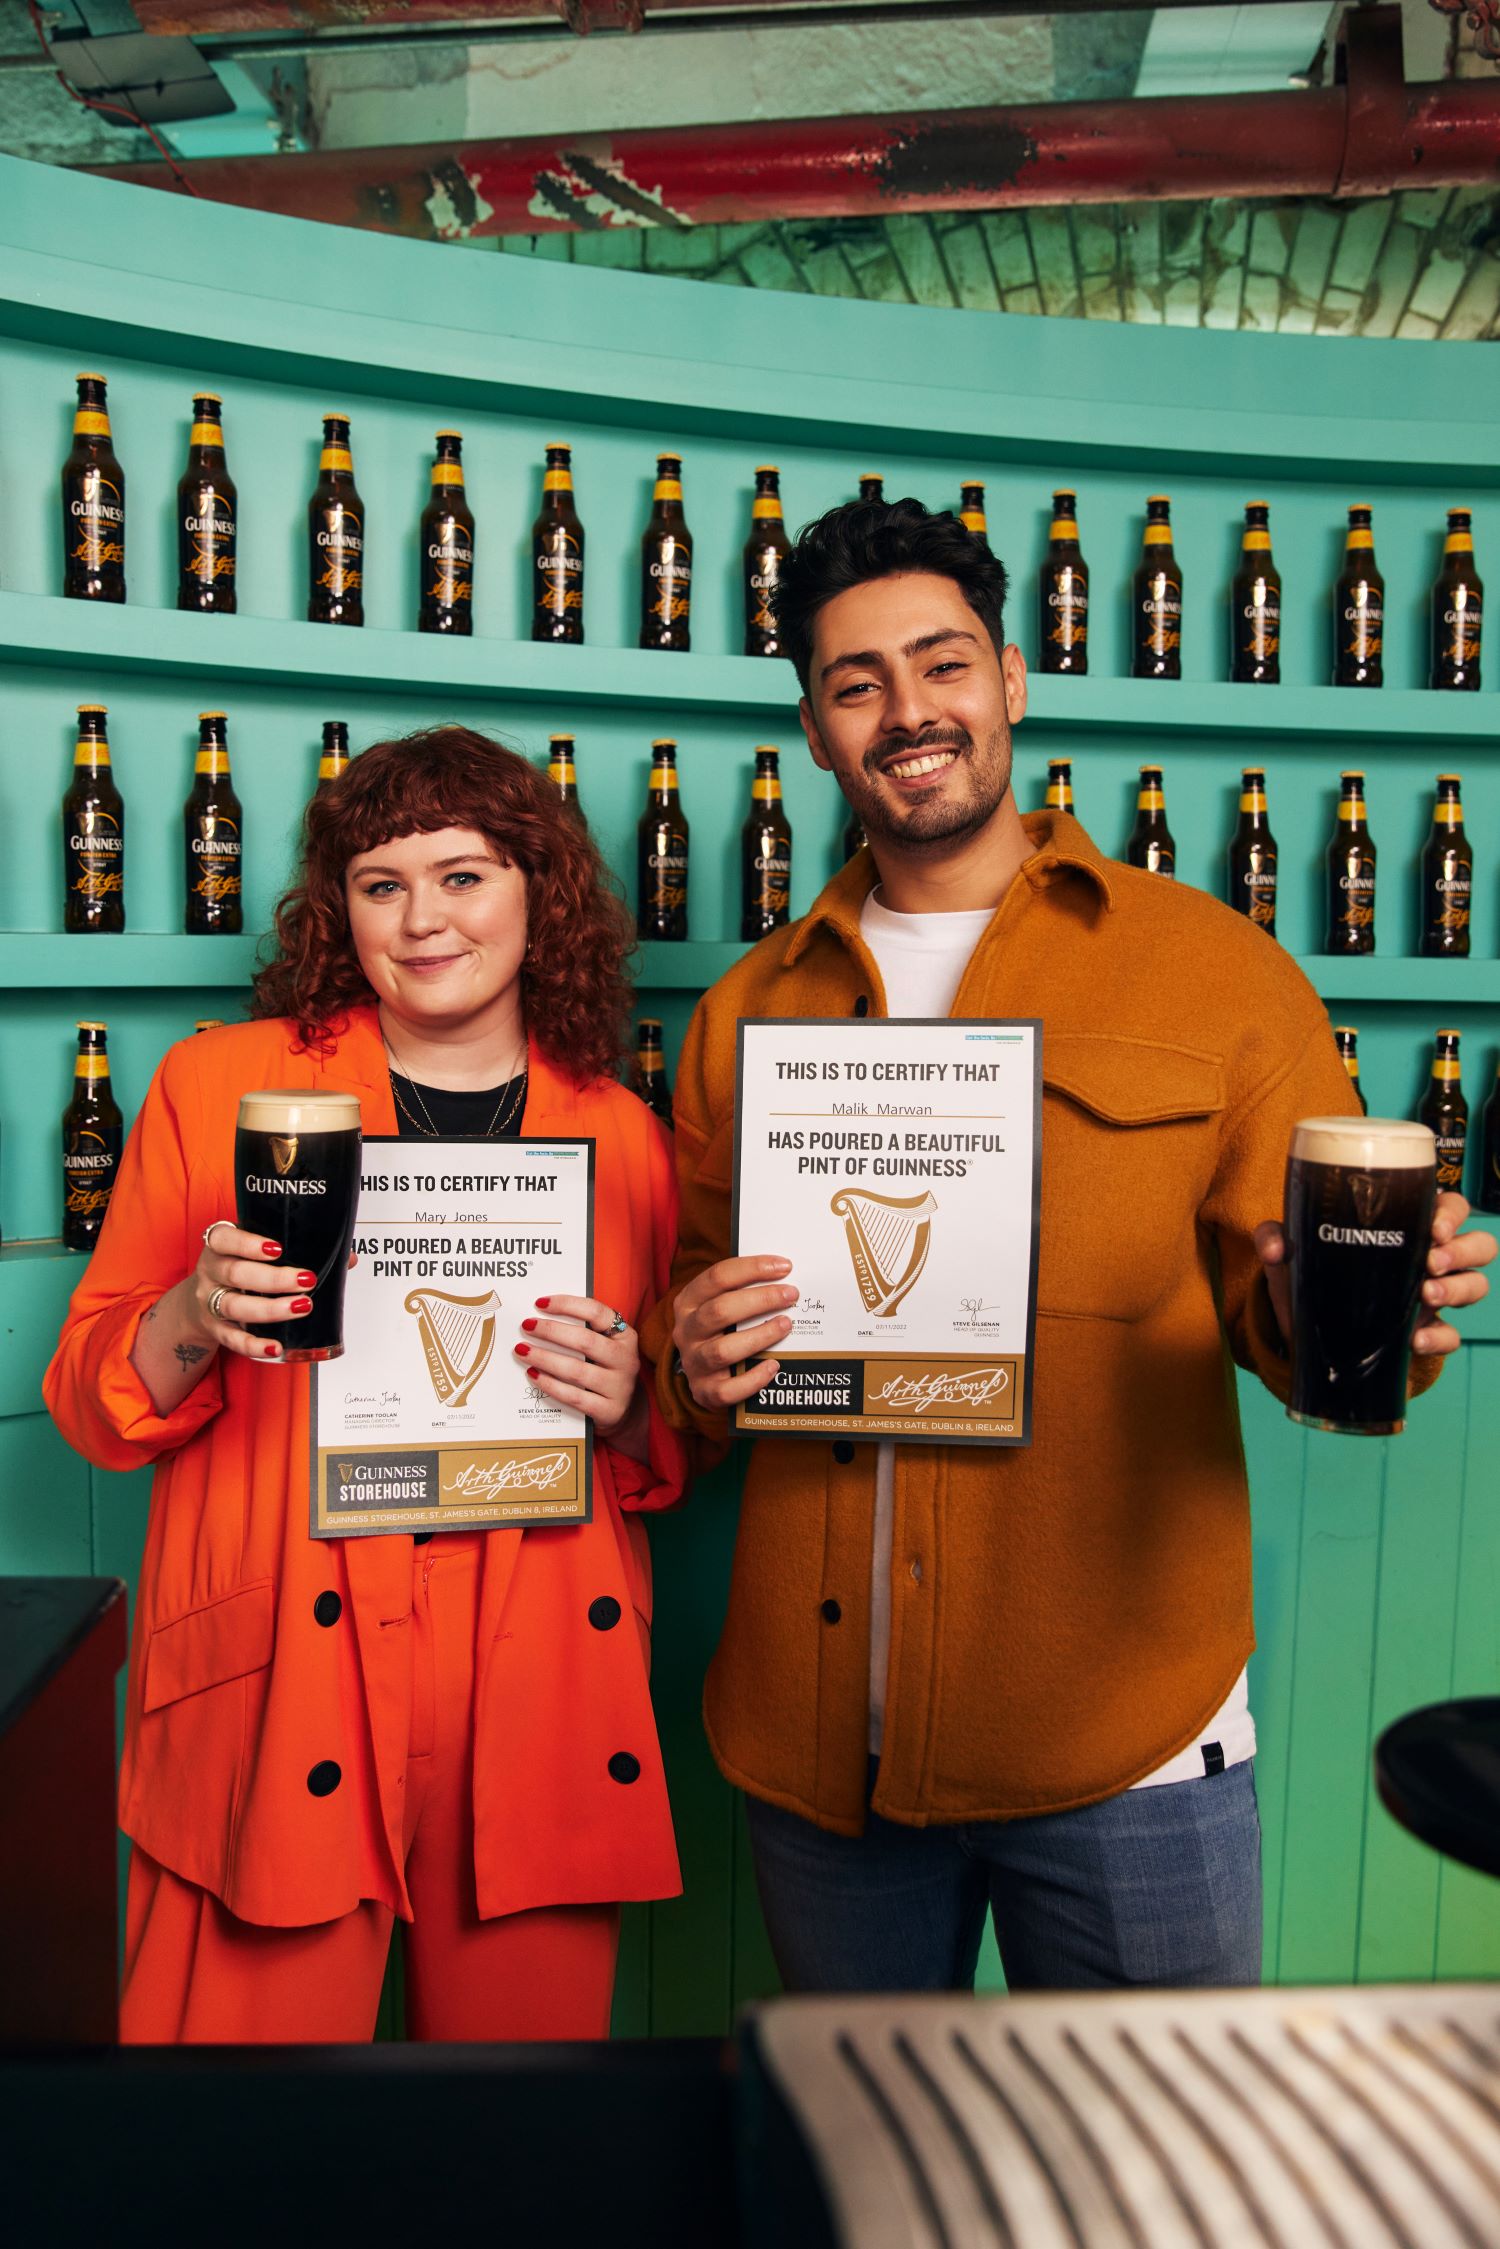 Happy visitors proudly showing their Guinness Academy certificate and beautifully poured pint of Guinness